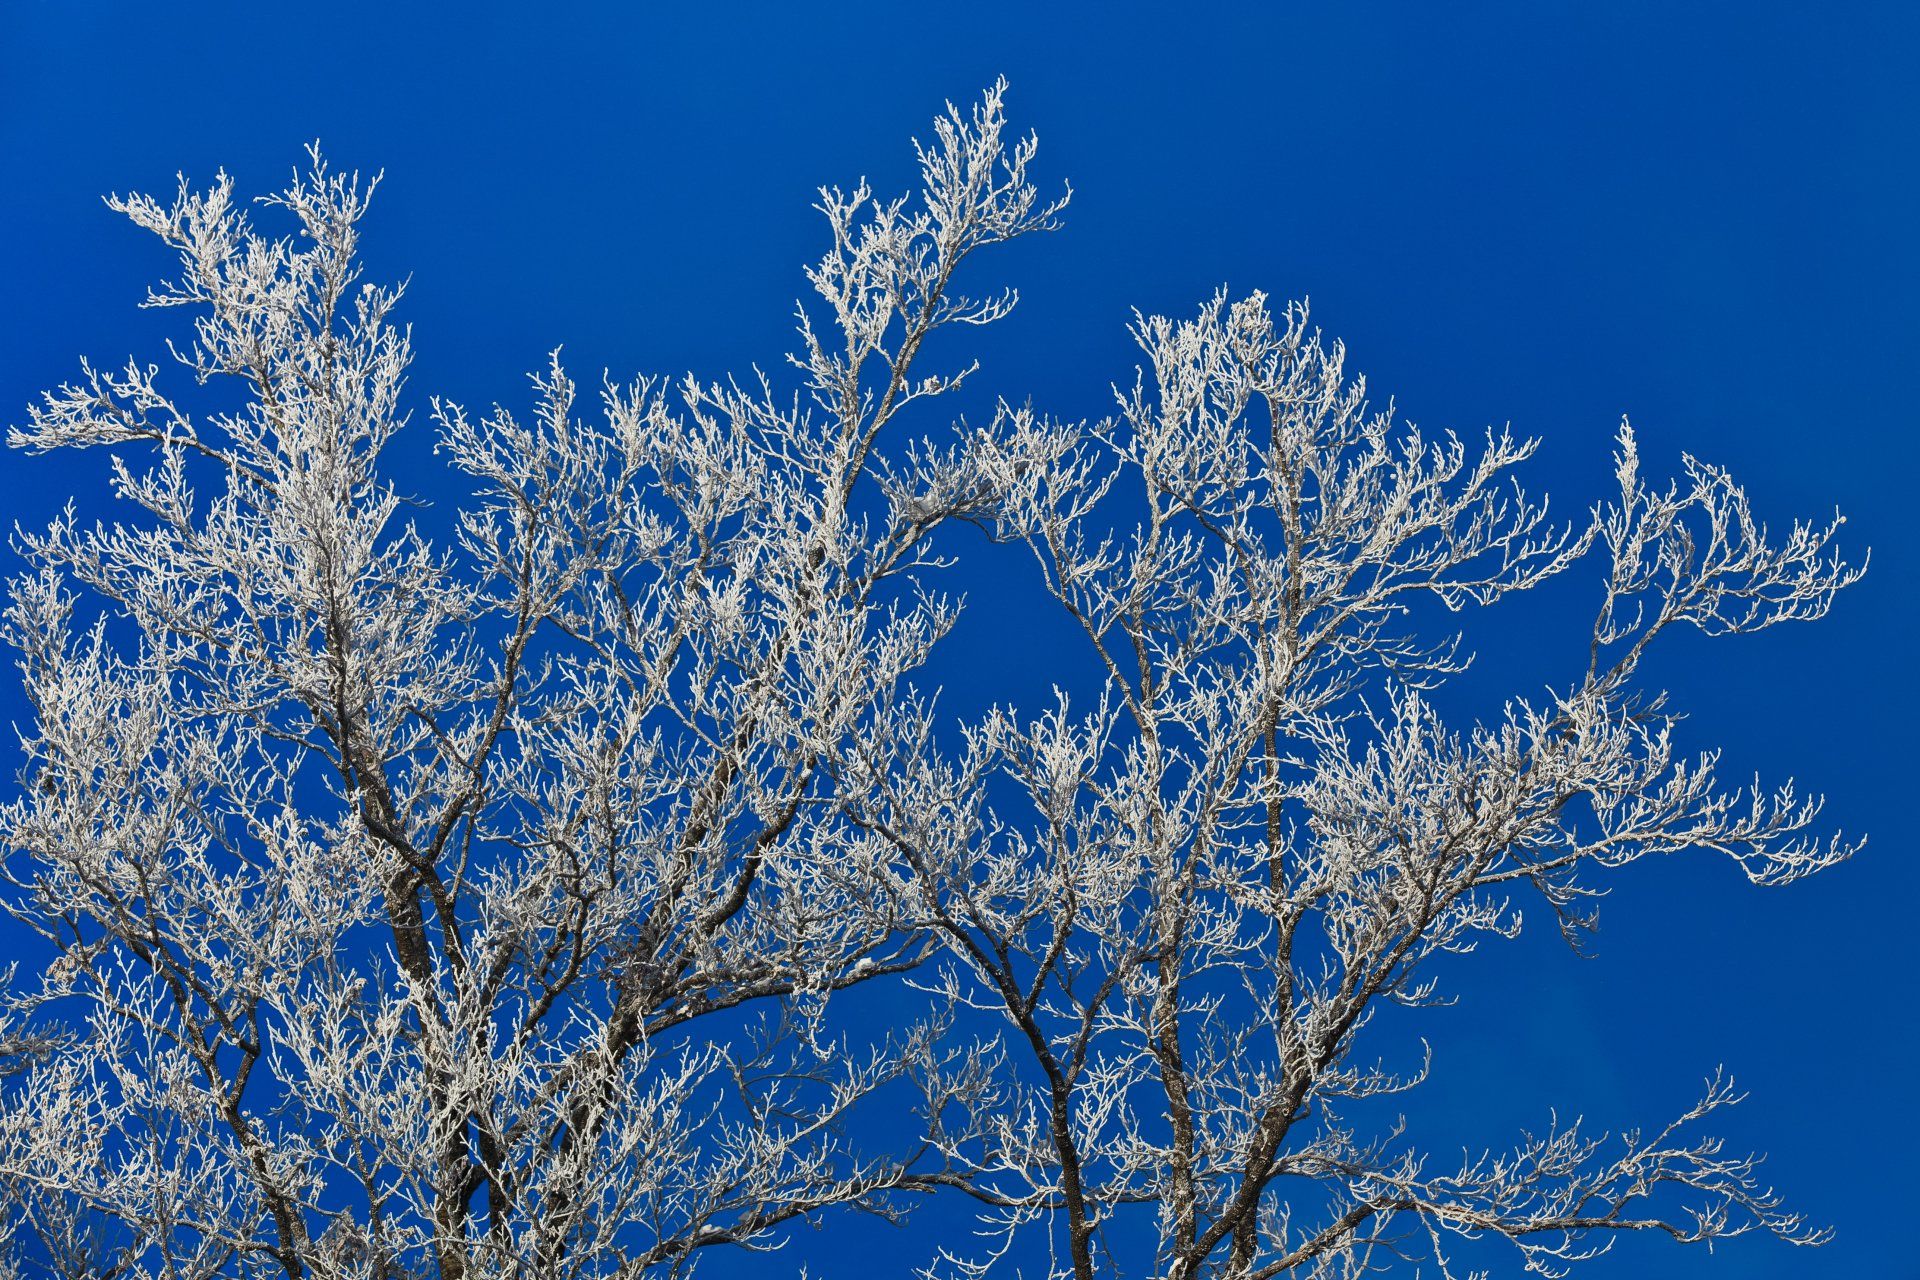 Read Braik's Tree Care in Columbia, MO's guide to preparing your trees for winter.